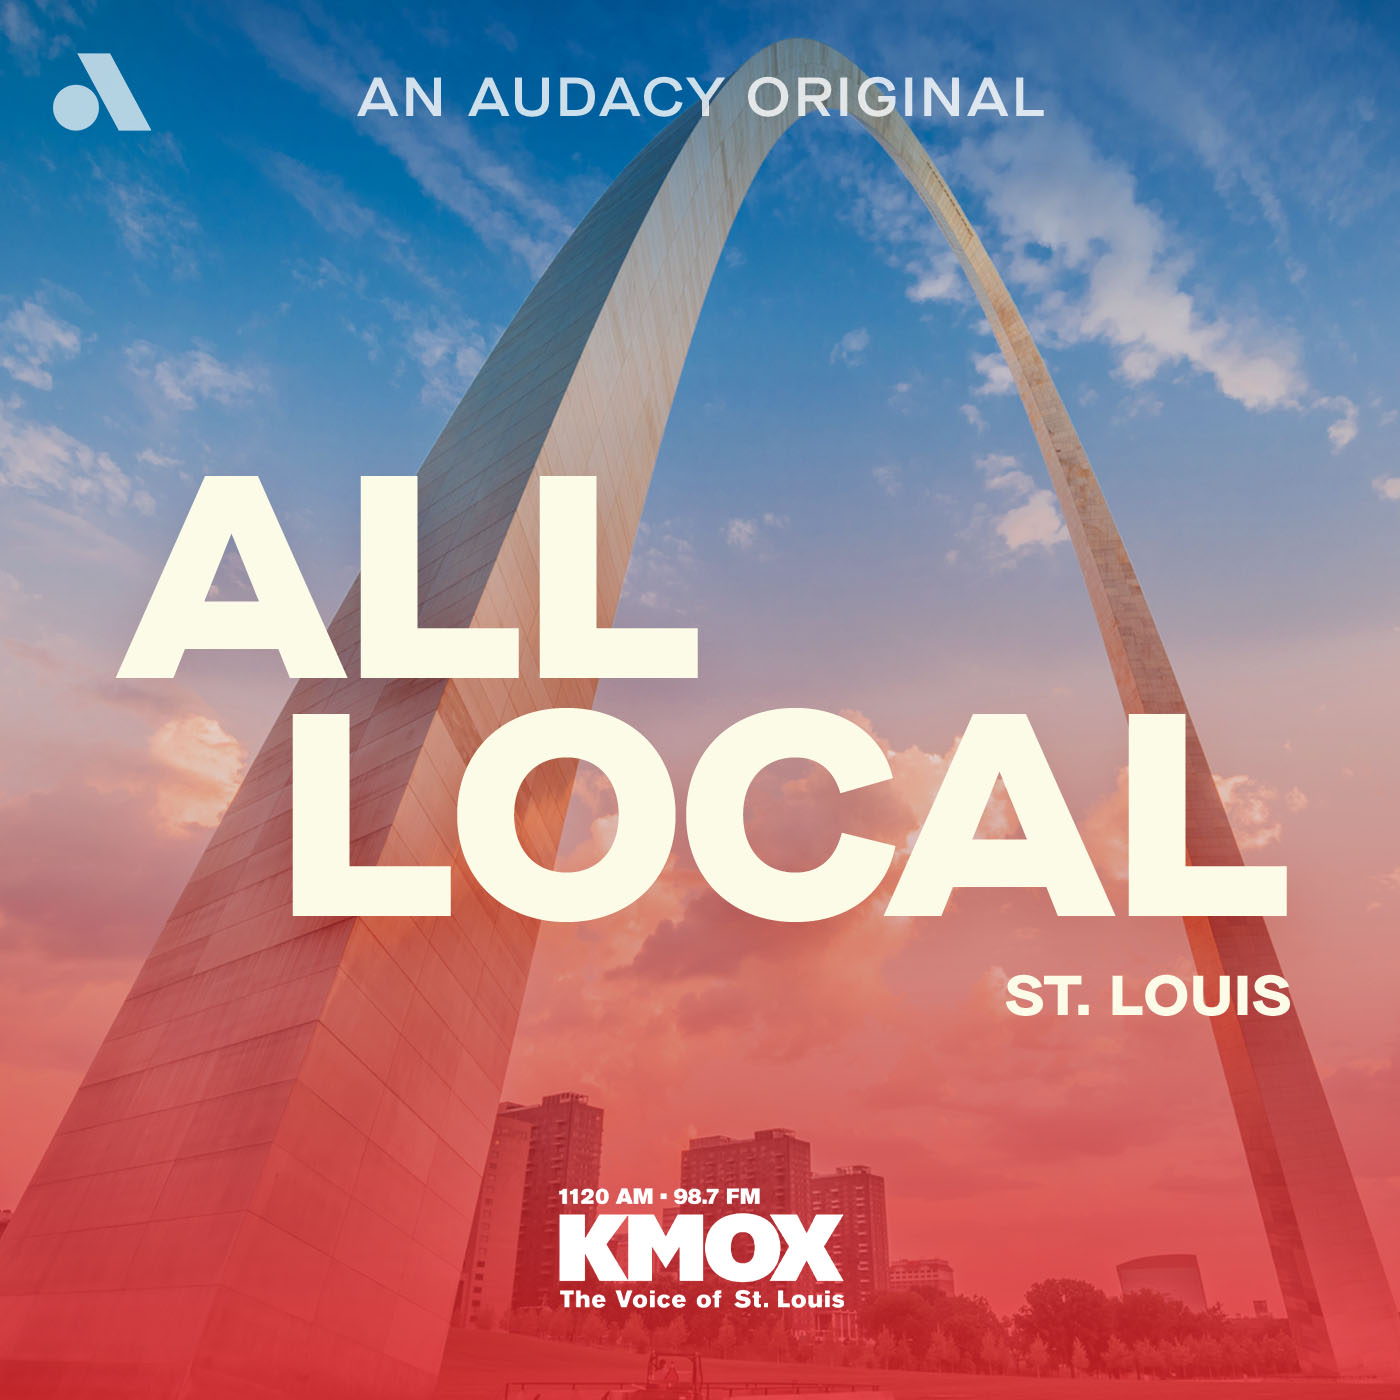 St. Louis All Local PM: Is big hail causing your homeowners insurance to increase?